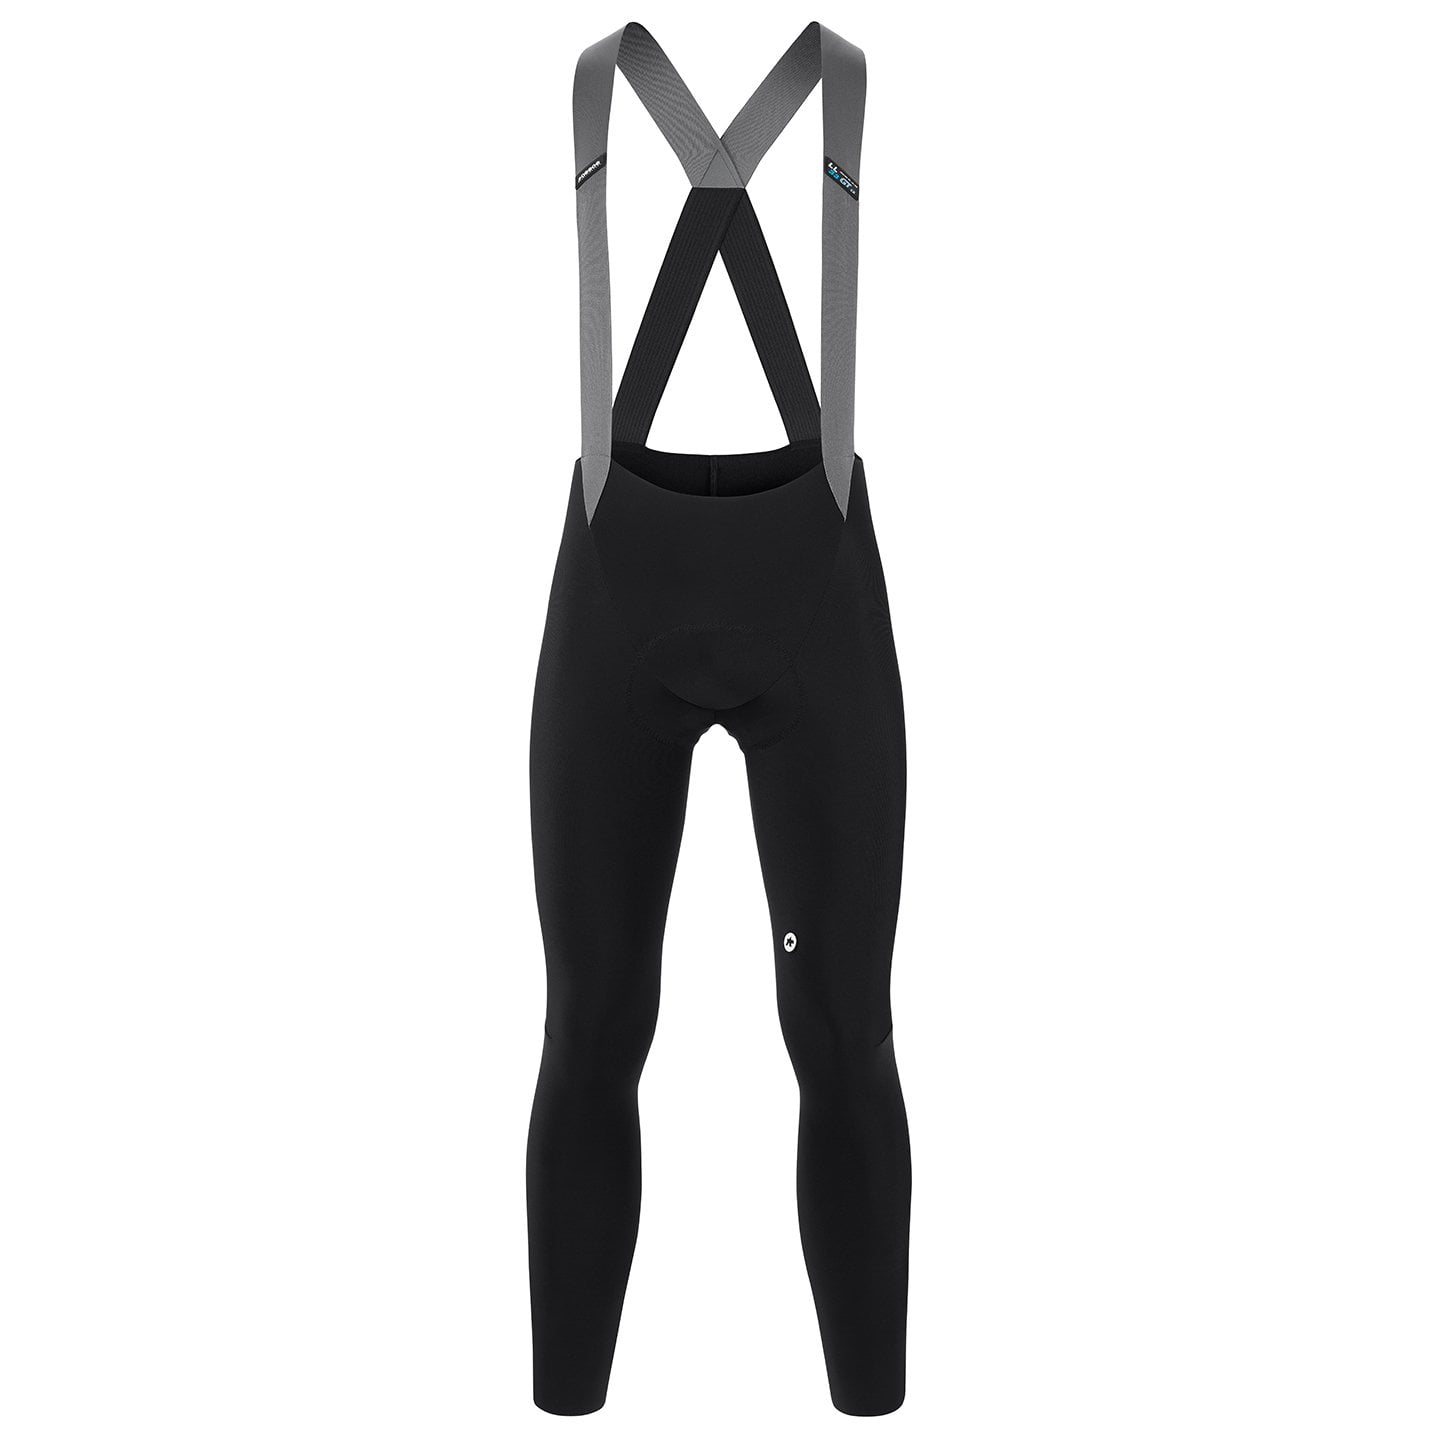 ASSOS Mille GT Winter C2 Bib Tights Bib Tights, for men, size S, Cycle trousers, Cycle clothing